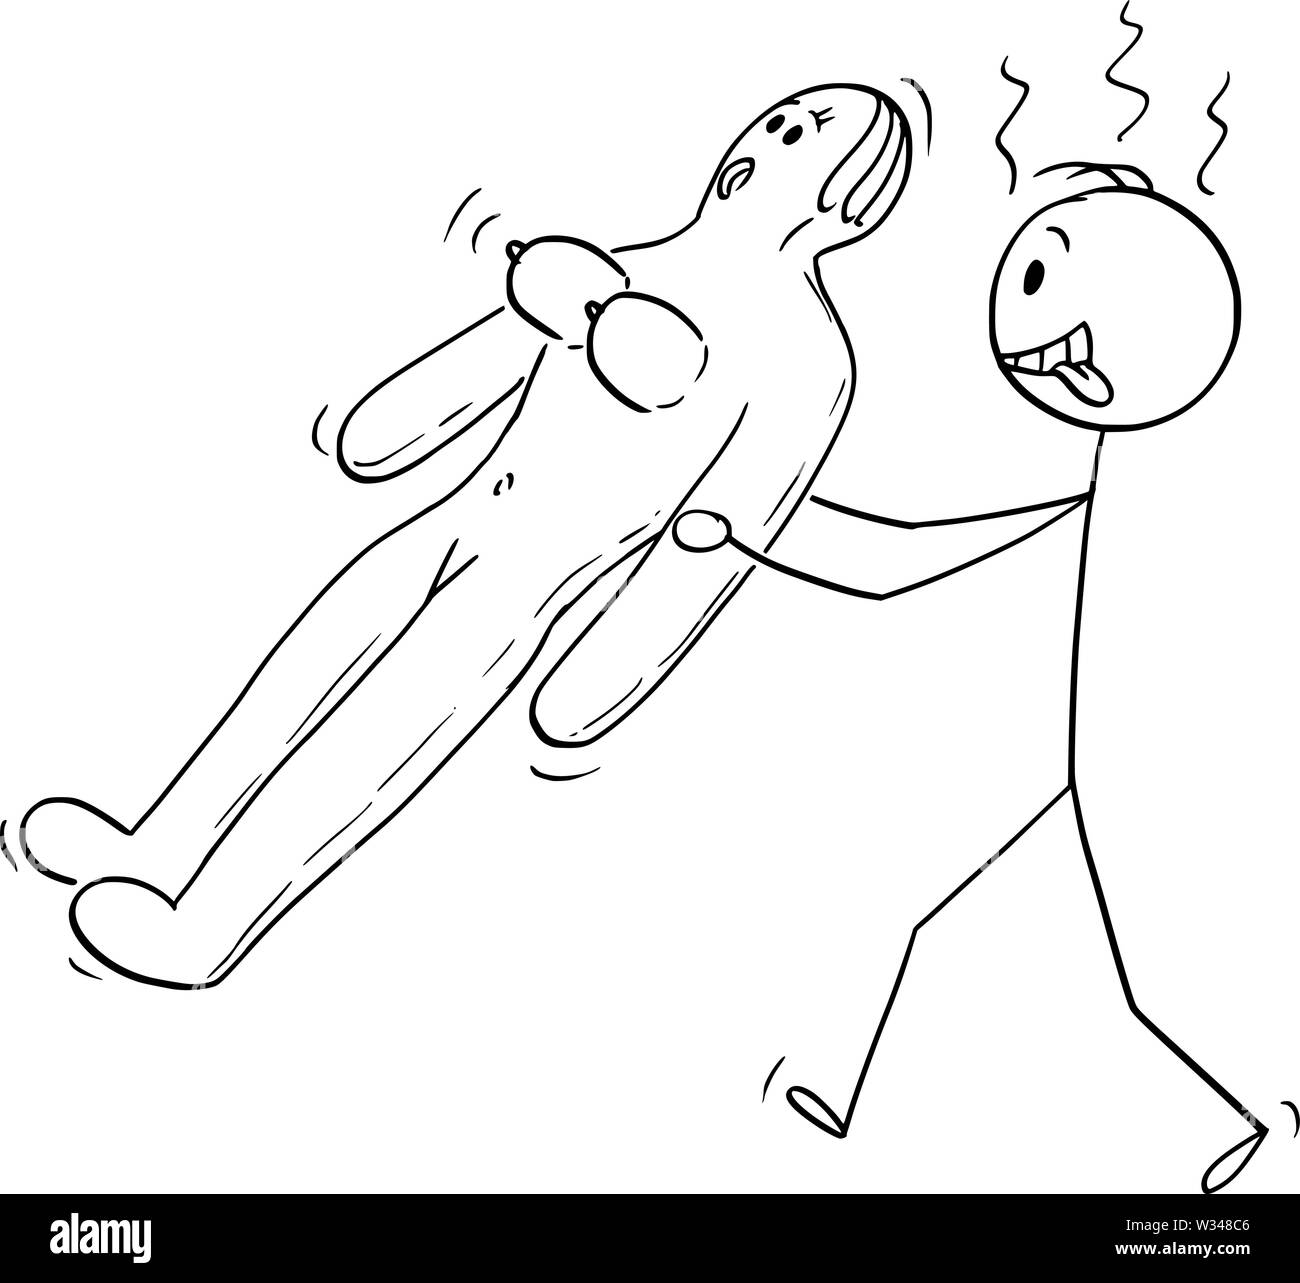 Vector cartoon stick figure drawing conceptual illustration of sex-starved, horny or randy man carrying rubber blow-up sex doll Stock Vector Image and Art  pic